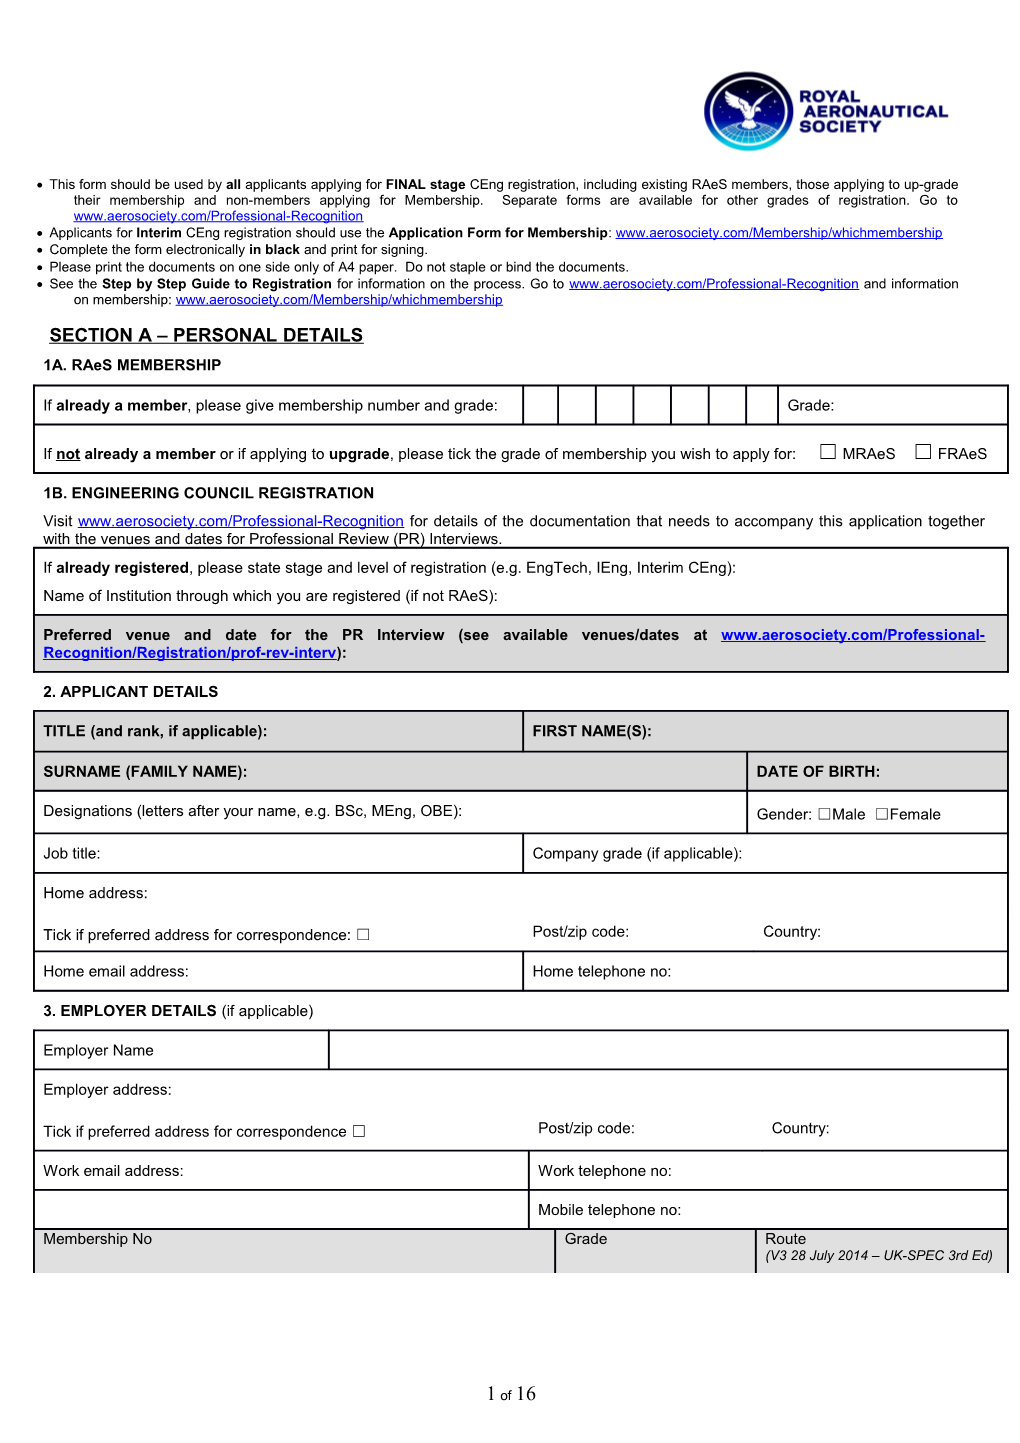 Complete the Form Electronically in Black and Print for Signing